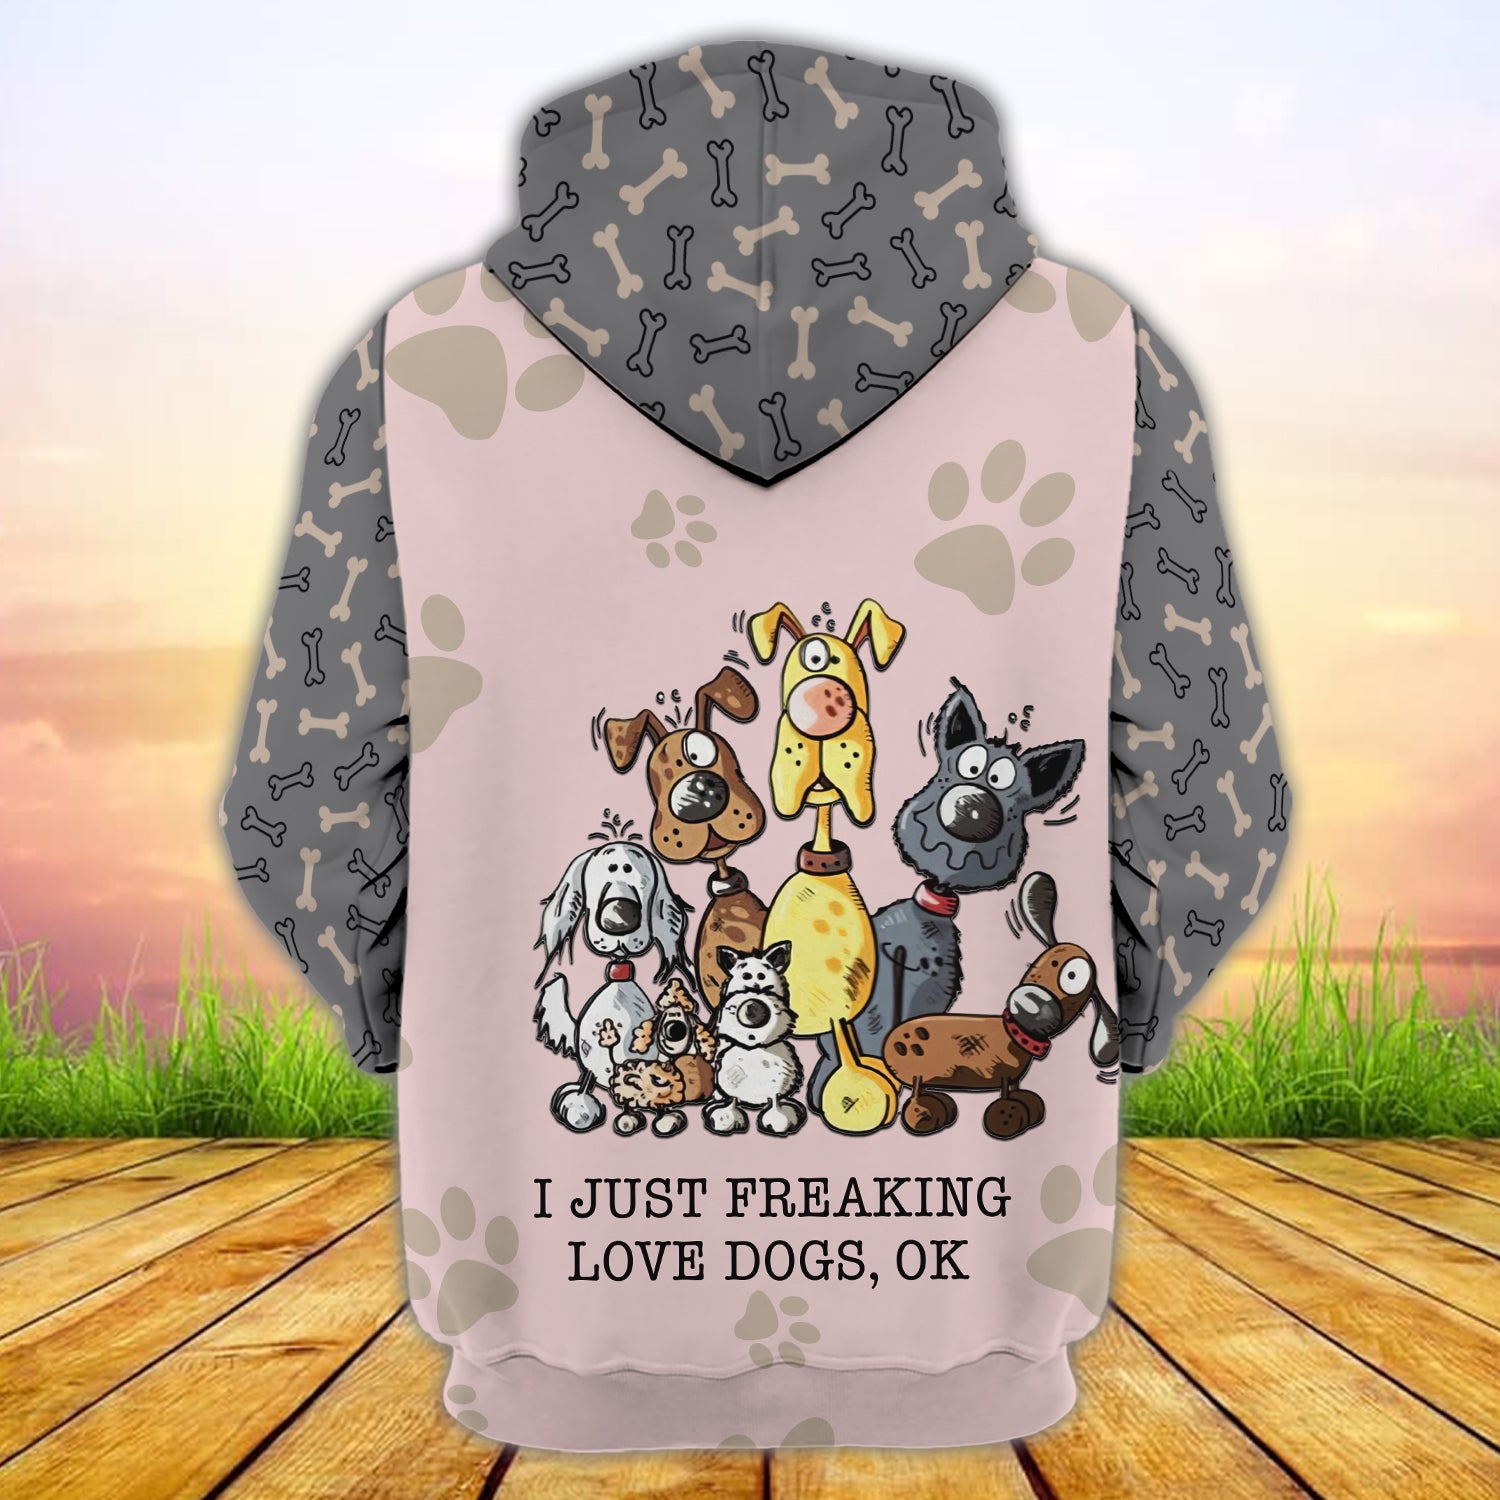 Personalized Name-I just freaking love dogs, ok-3D Zipper Hoodie - HTV